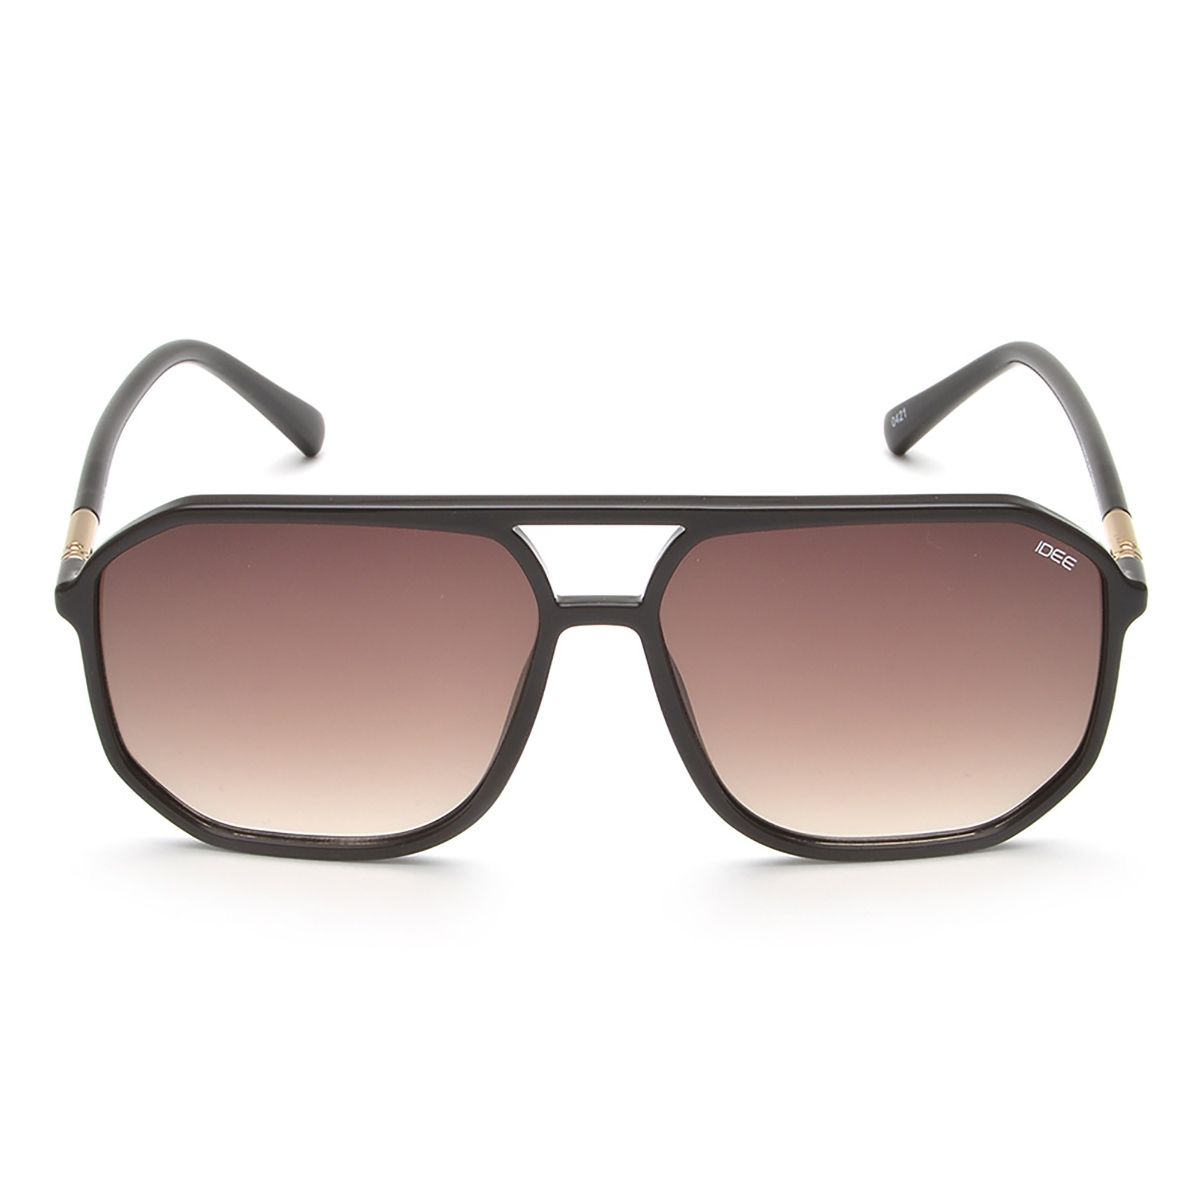 Equal Brown Gradient Color Sunglasses Square Shape Full Rim Black Frame (Brown) At Nykaa, Best Beauty Products Online